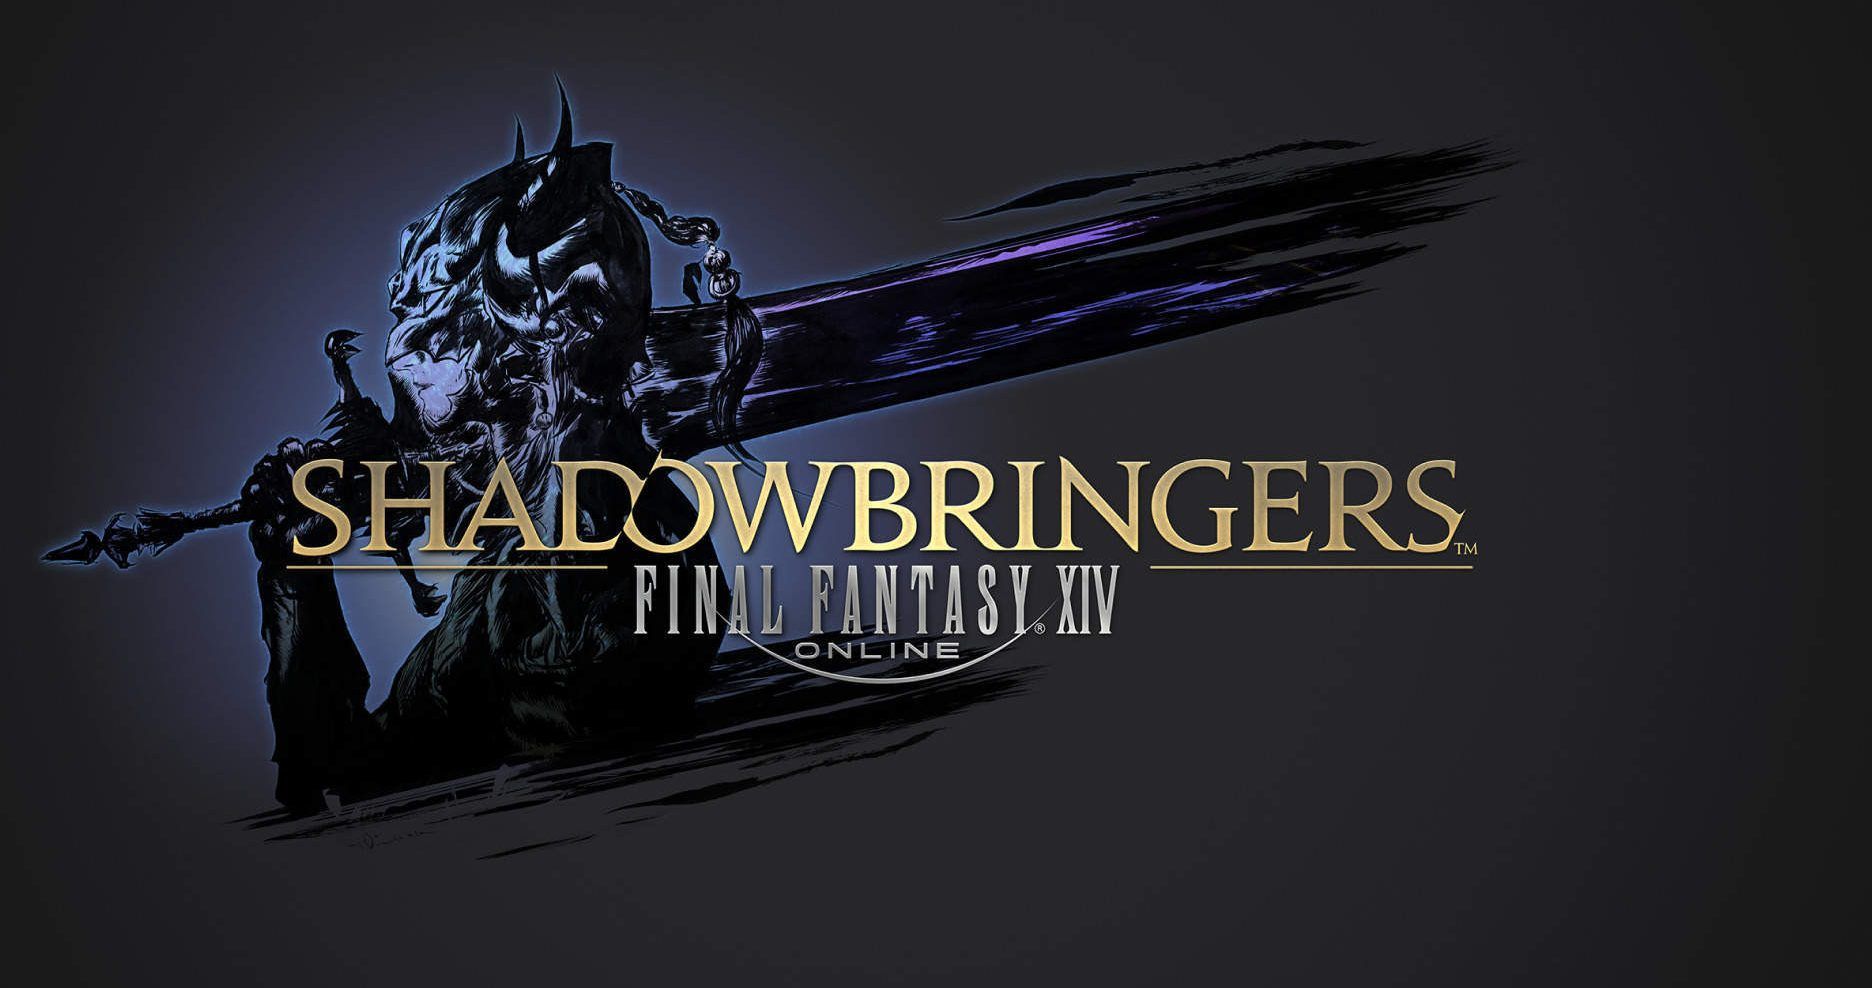  Final Fantasy XIV: Shadowbringers - How To Unlock All The Beast Tribe Quests